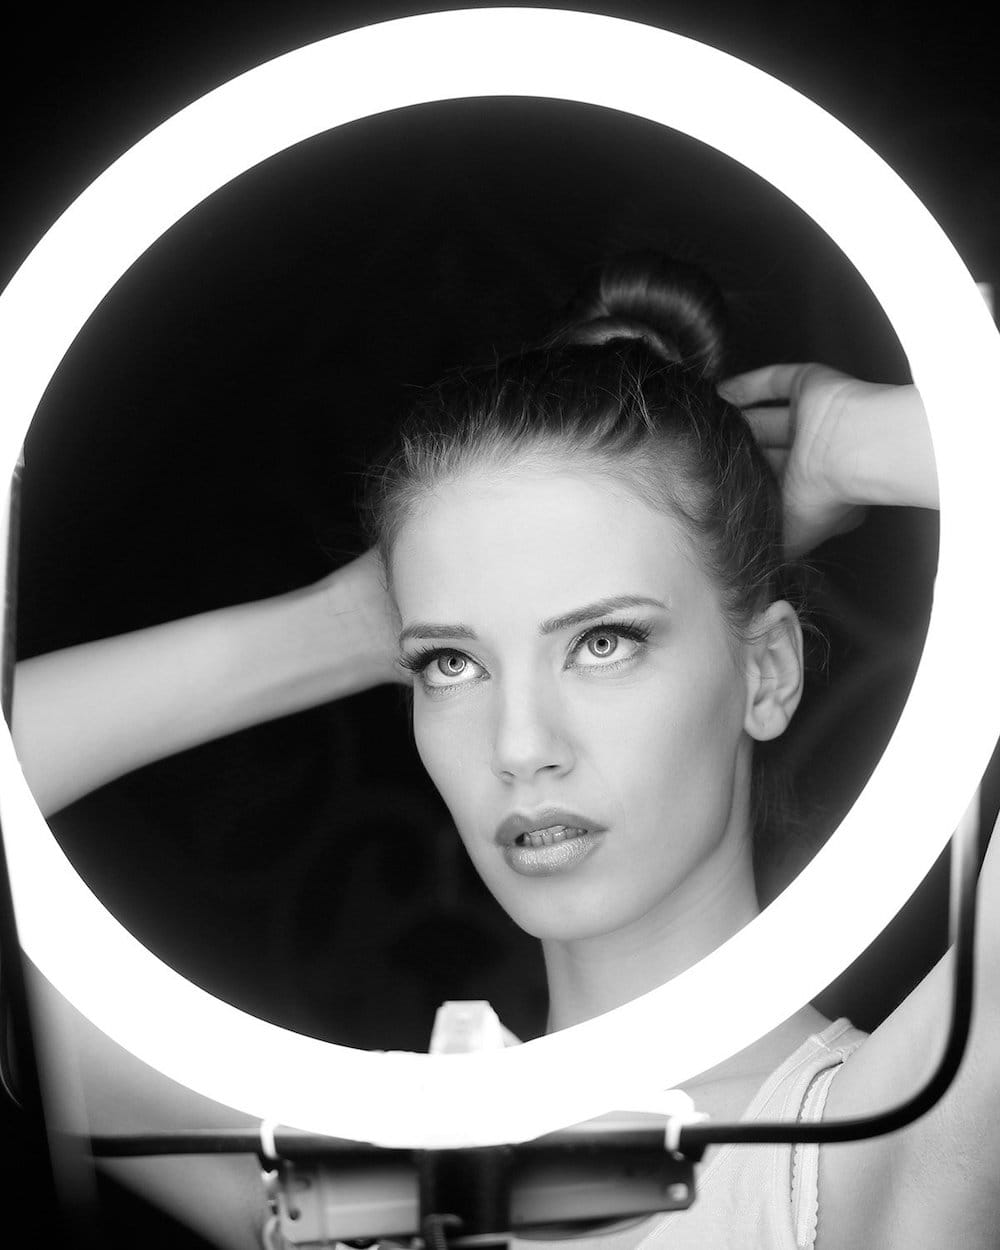 vi peel patient model fixing her hair in front of a ring light